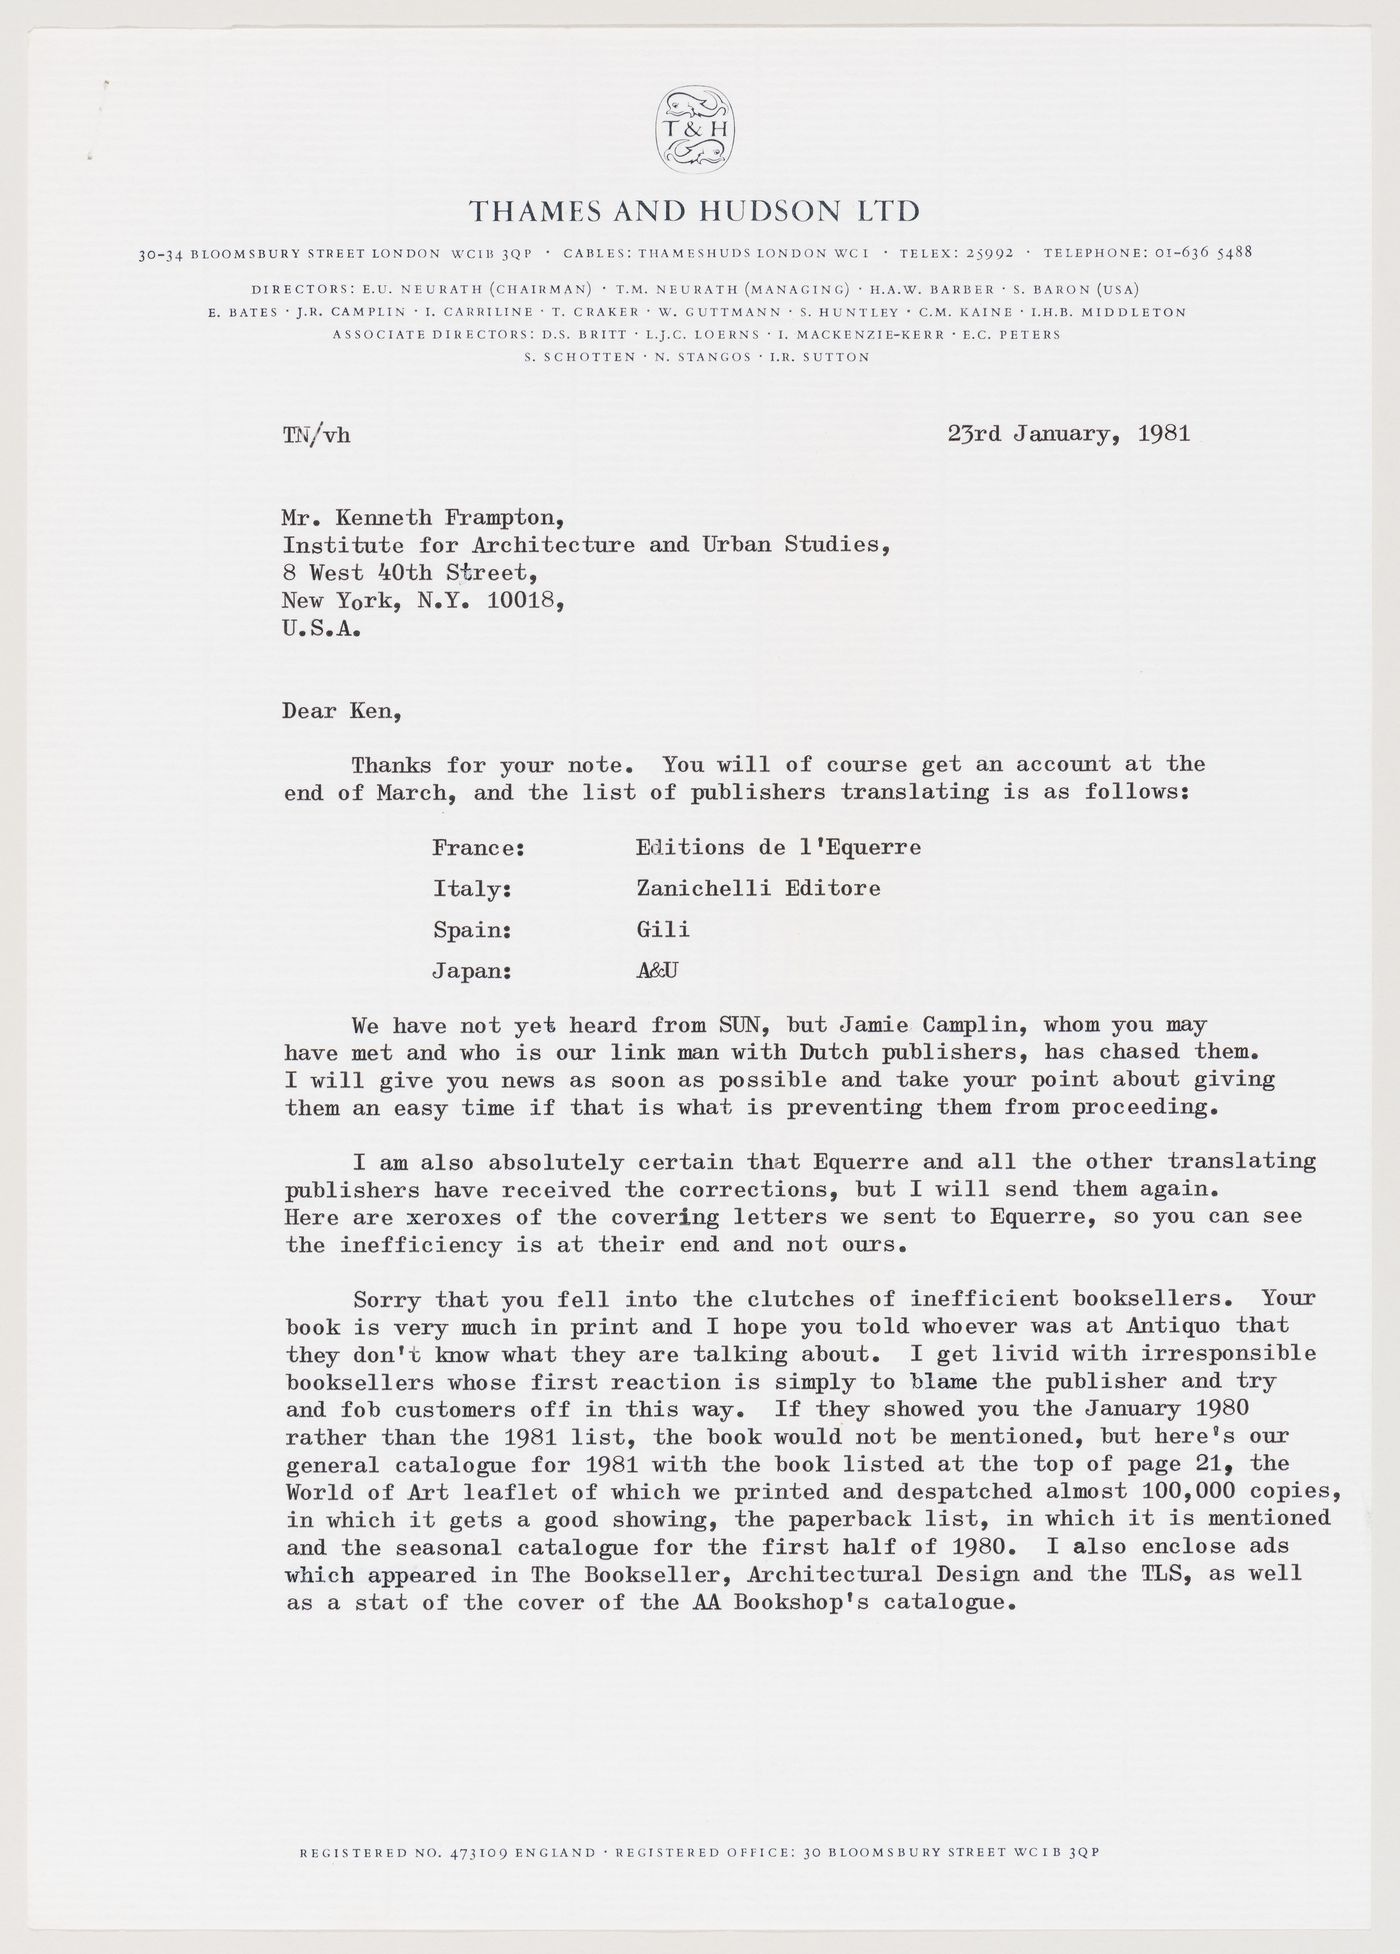 Letter from Thomas Neurath to Kenneth Frampton about "Modern Architecture: A Critical History" Translations